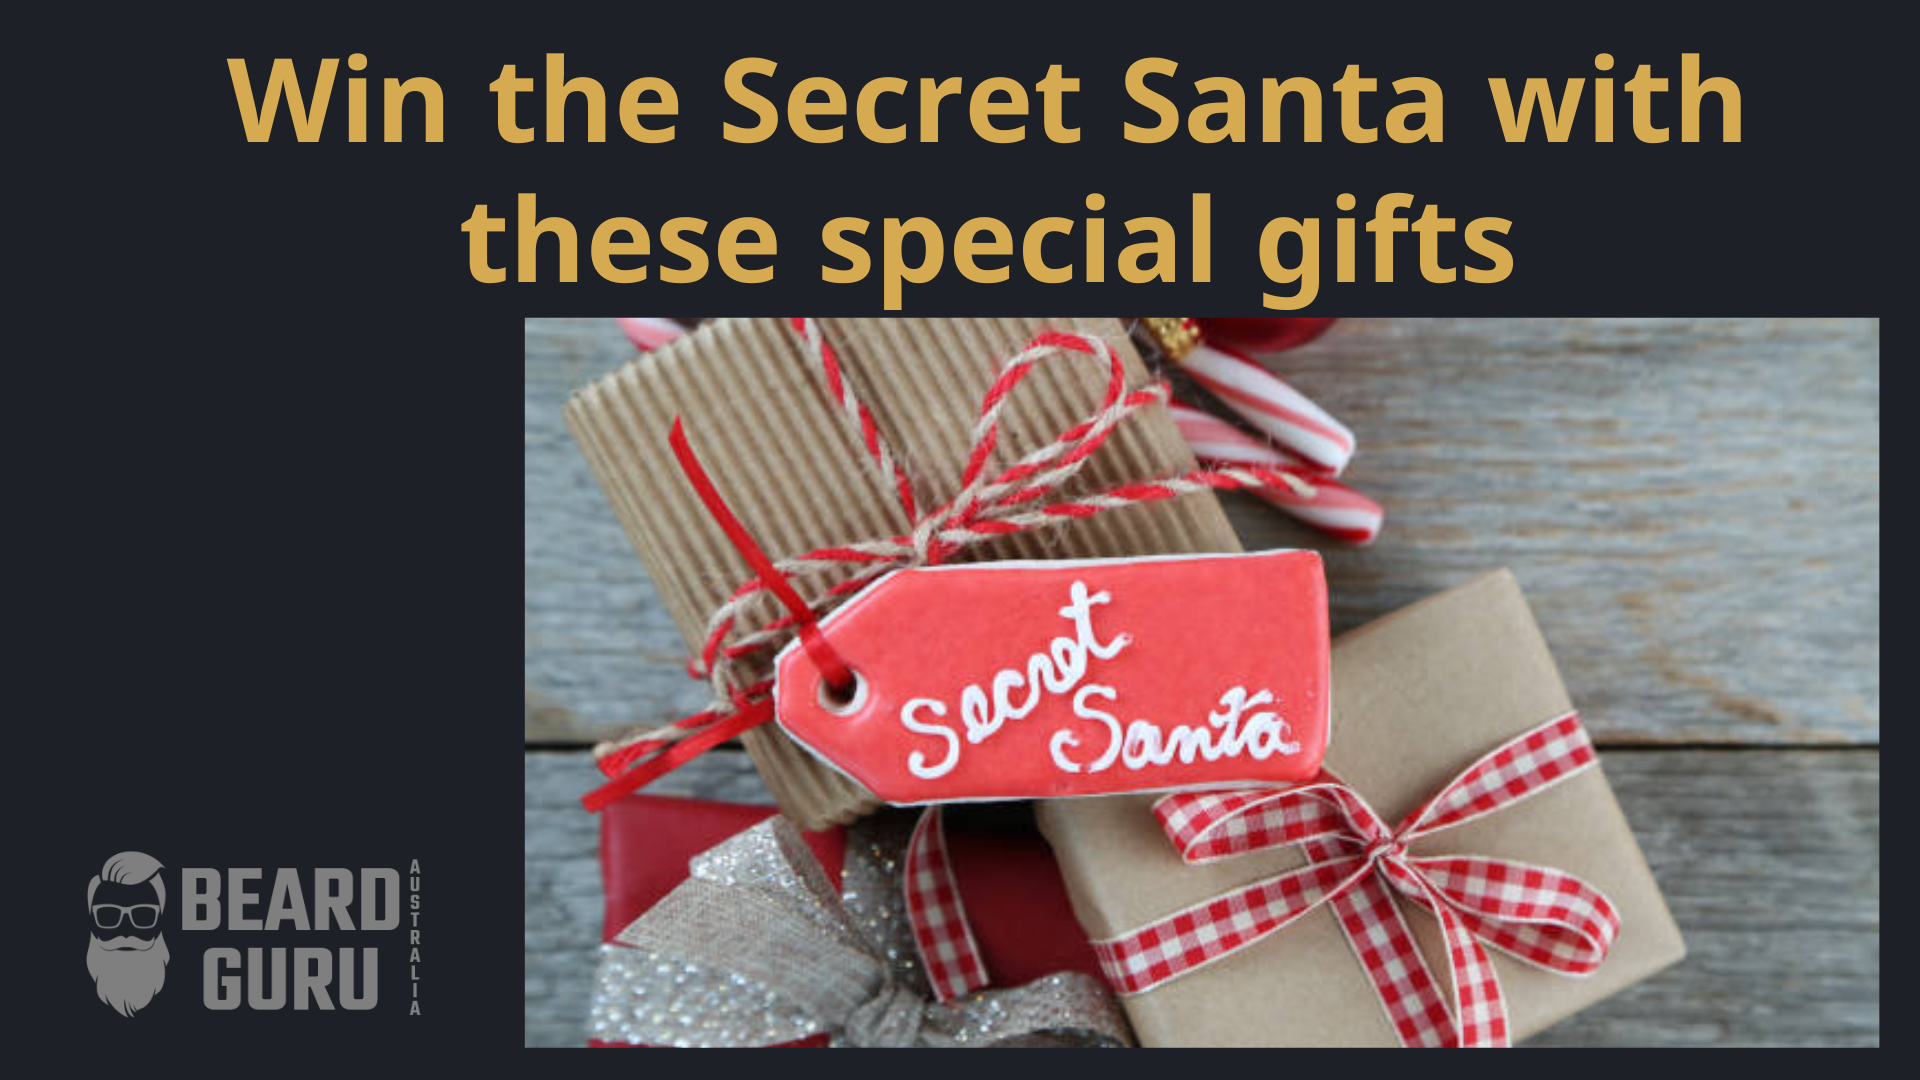 Win the Secret Santa with these special gifts